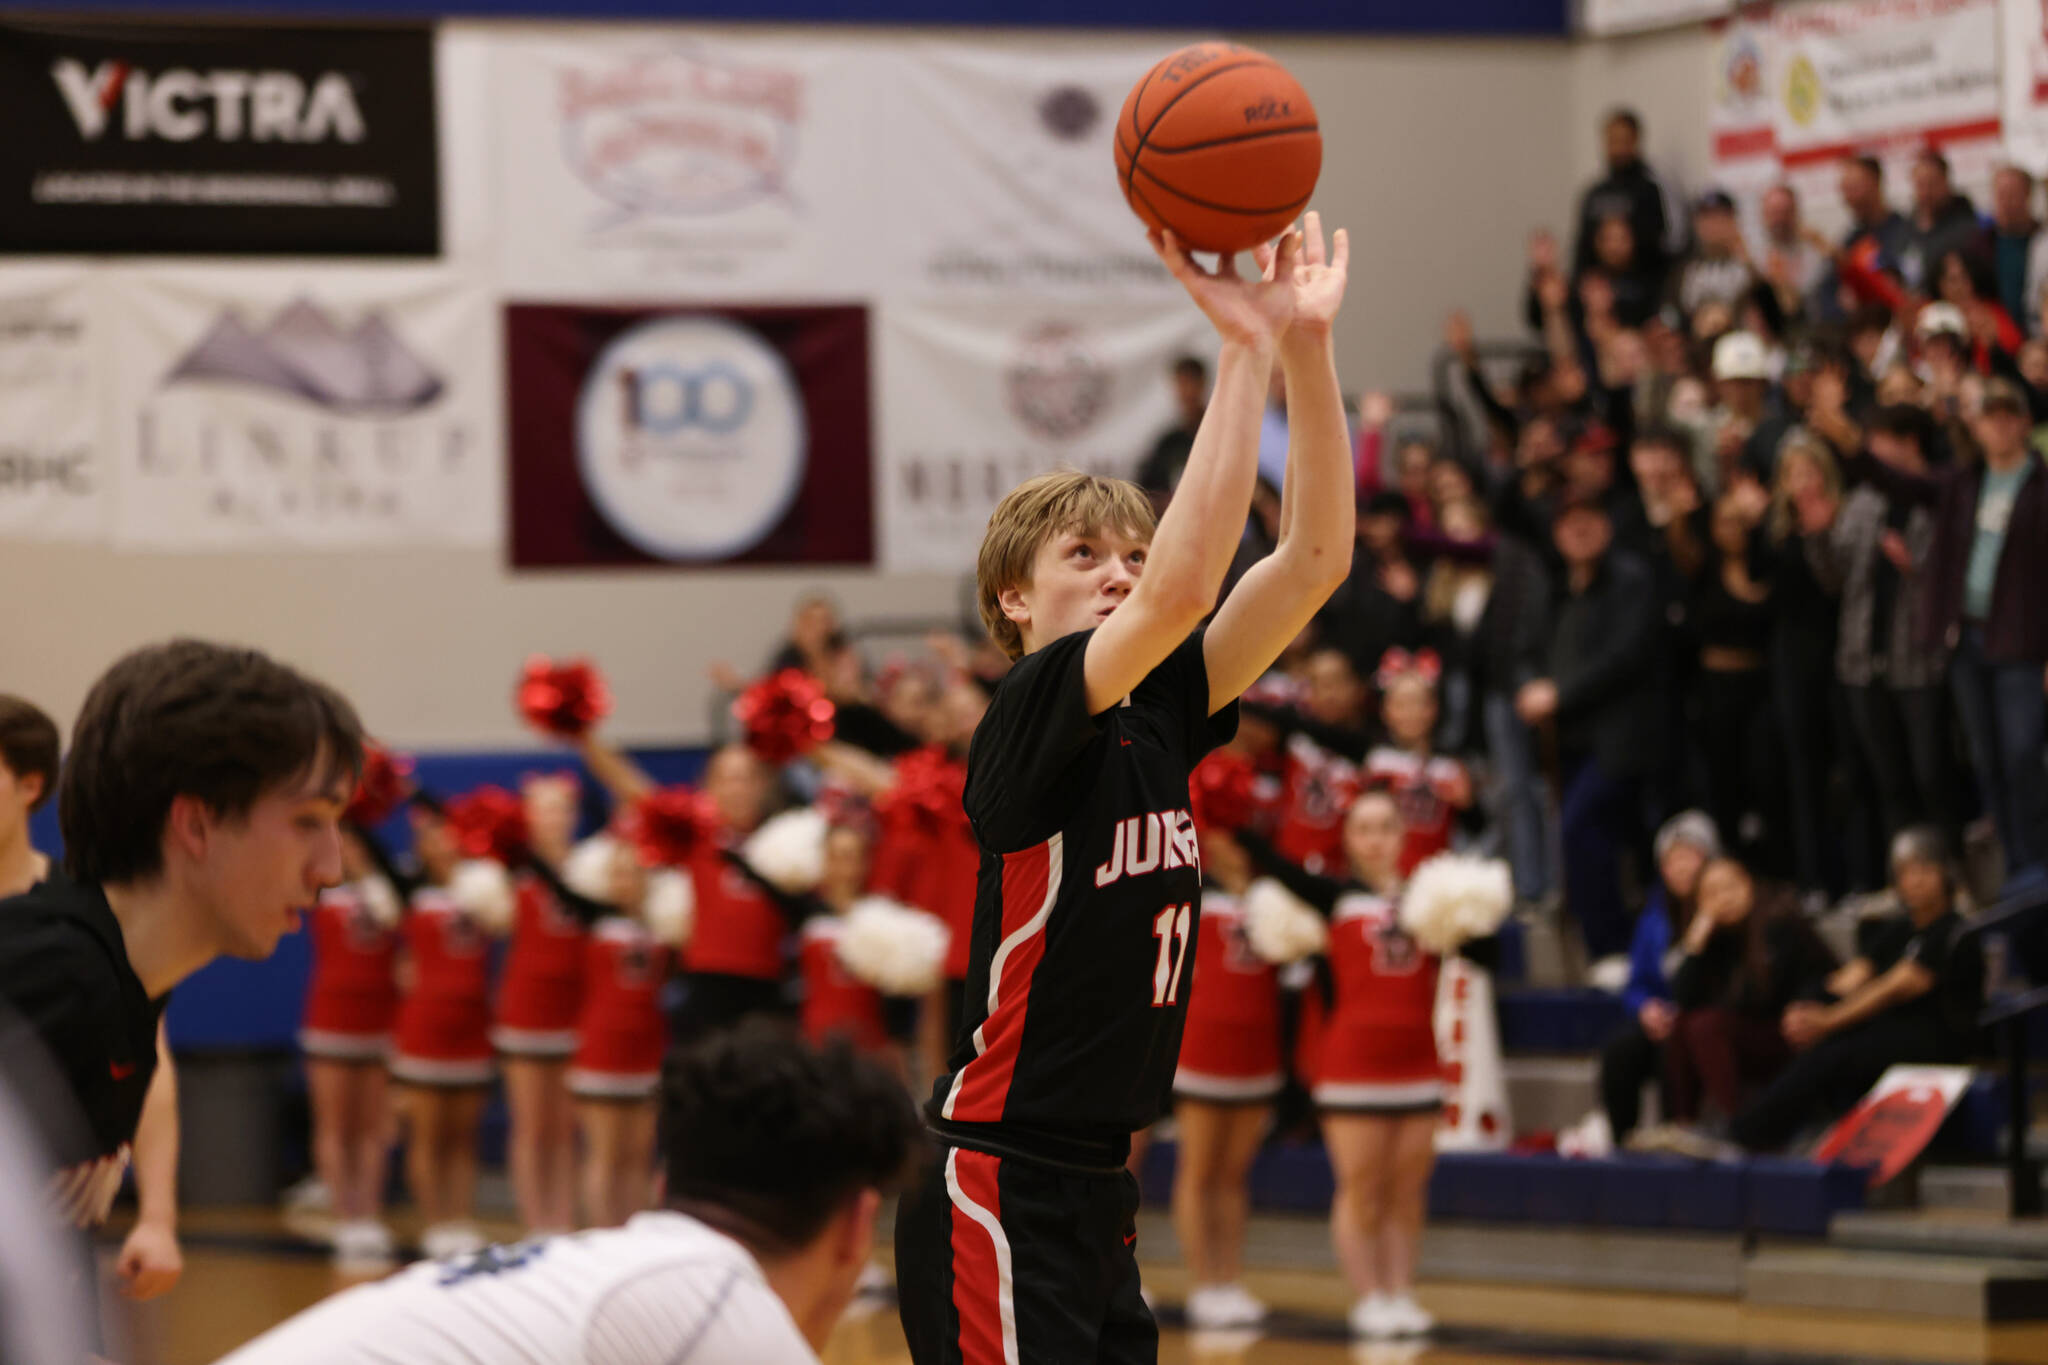 JDHS junior Sean Oliver takes a free throw shot during a game against Thunder Mountain High School on Thursday, Feb. 2. Oliver finished with a total of 20 points against the Crimson Bears’ most recent game against Palmer High School on Friday, Feb. 17. (Ben Hohenstatt / Juneau Empire file)